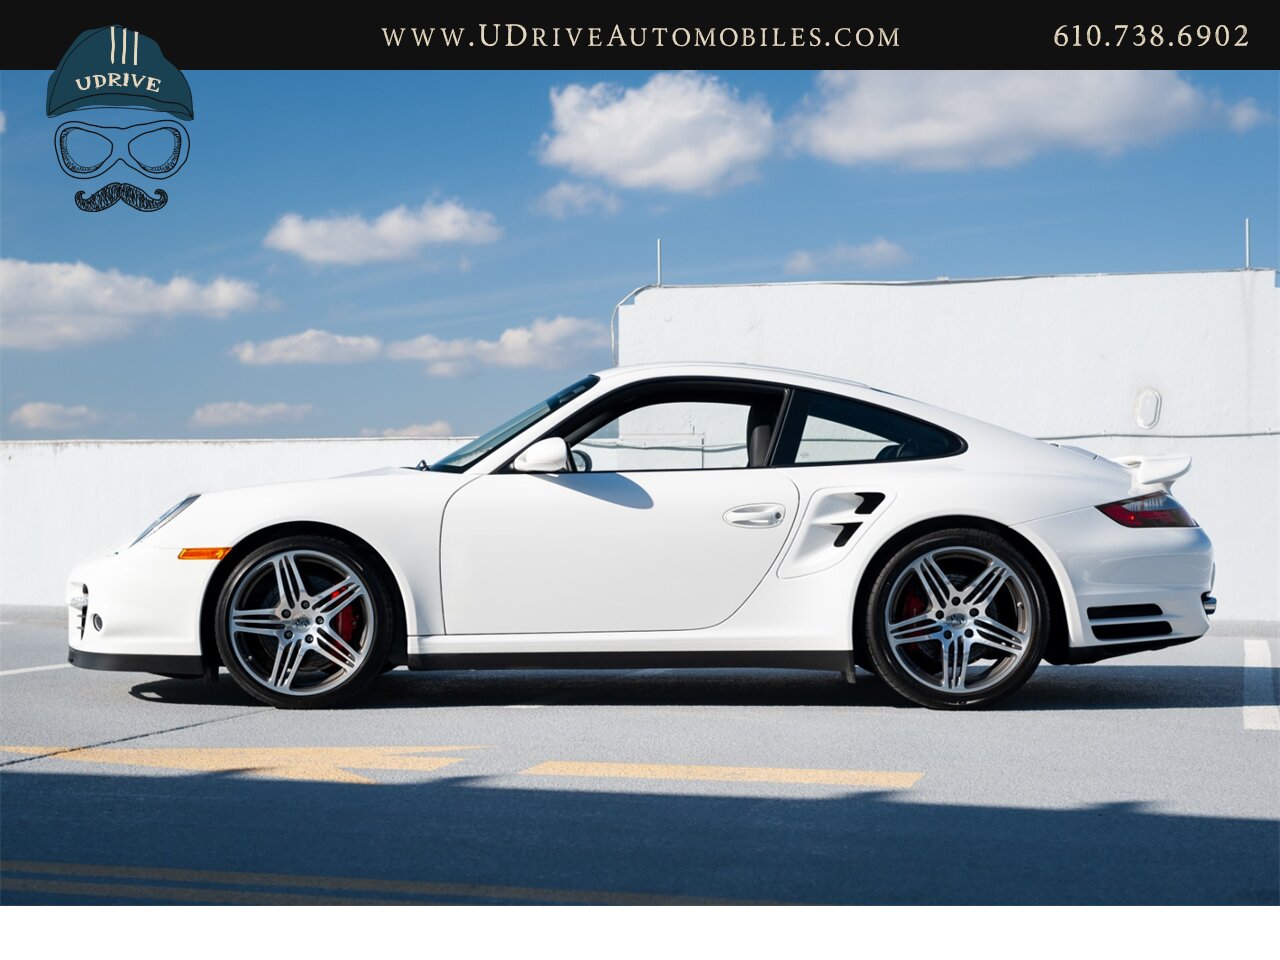 2007 Porsche 911 Turbo 642 Miles 1 Owner Carrara White 997  Sport Chrono Adaptive Sport Seats All Documentation from New - Photo 9 - West Chester, PA 19382